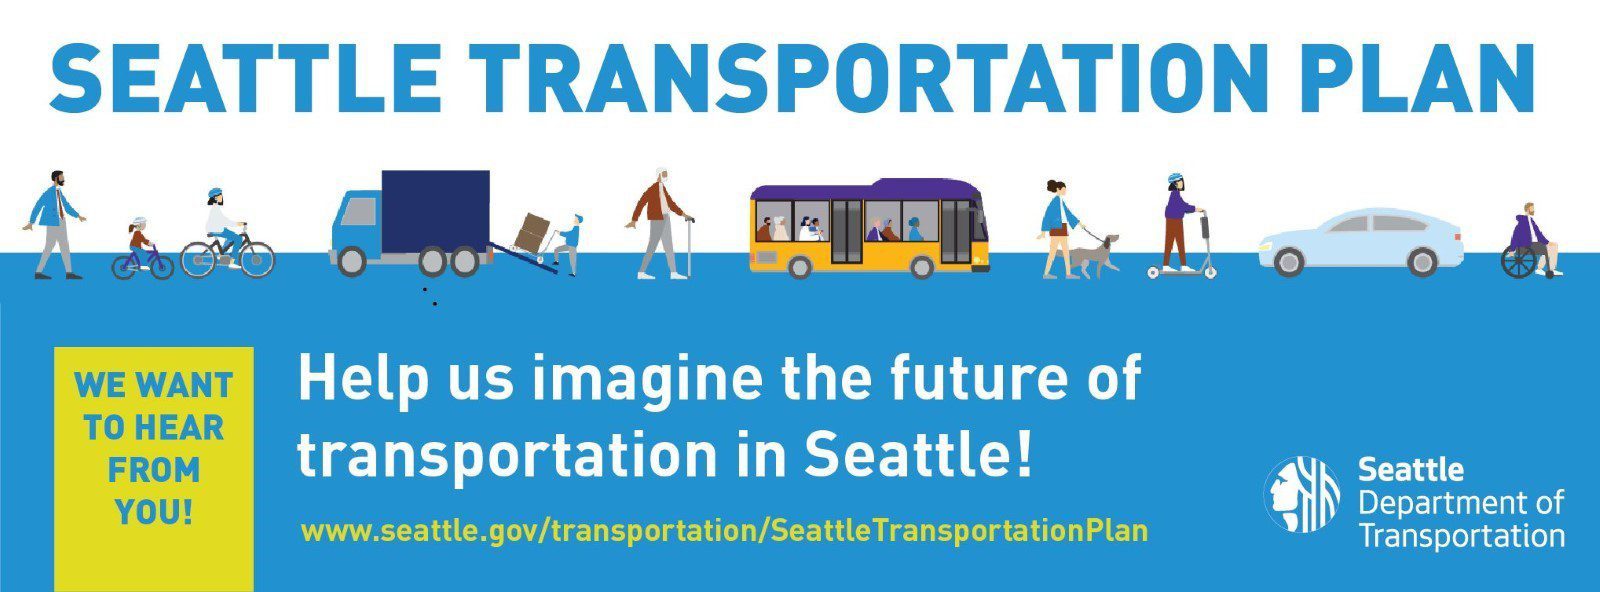 Graphic highlighting the Seattle Transportation Plan and asking community members to help us imagine the future of transportation in Seattle.